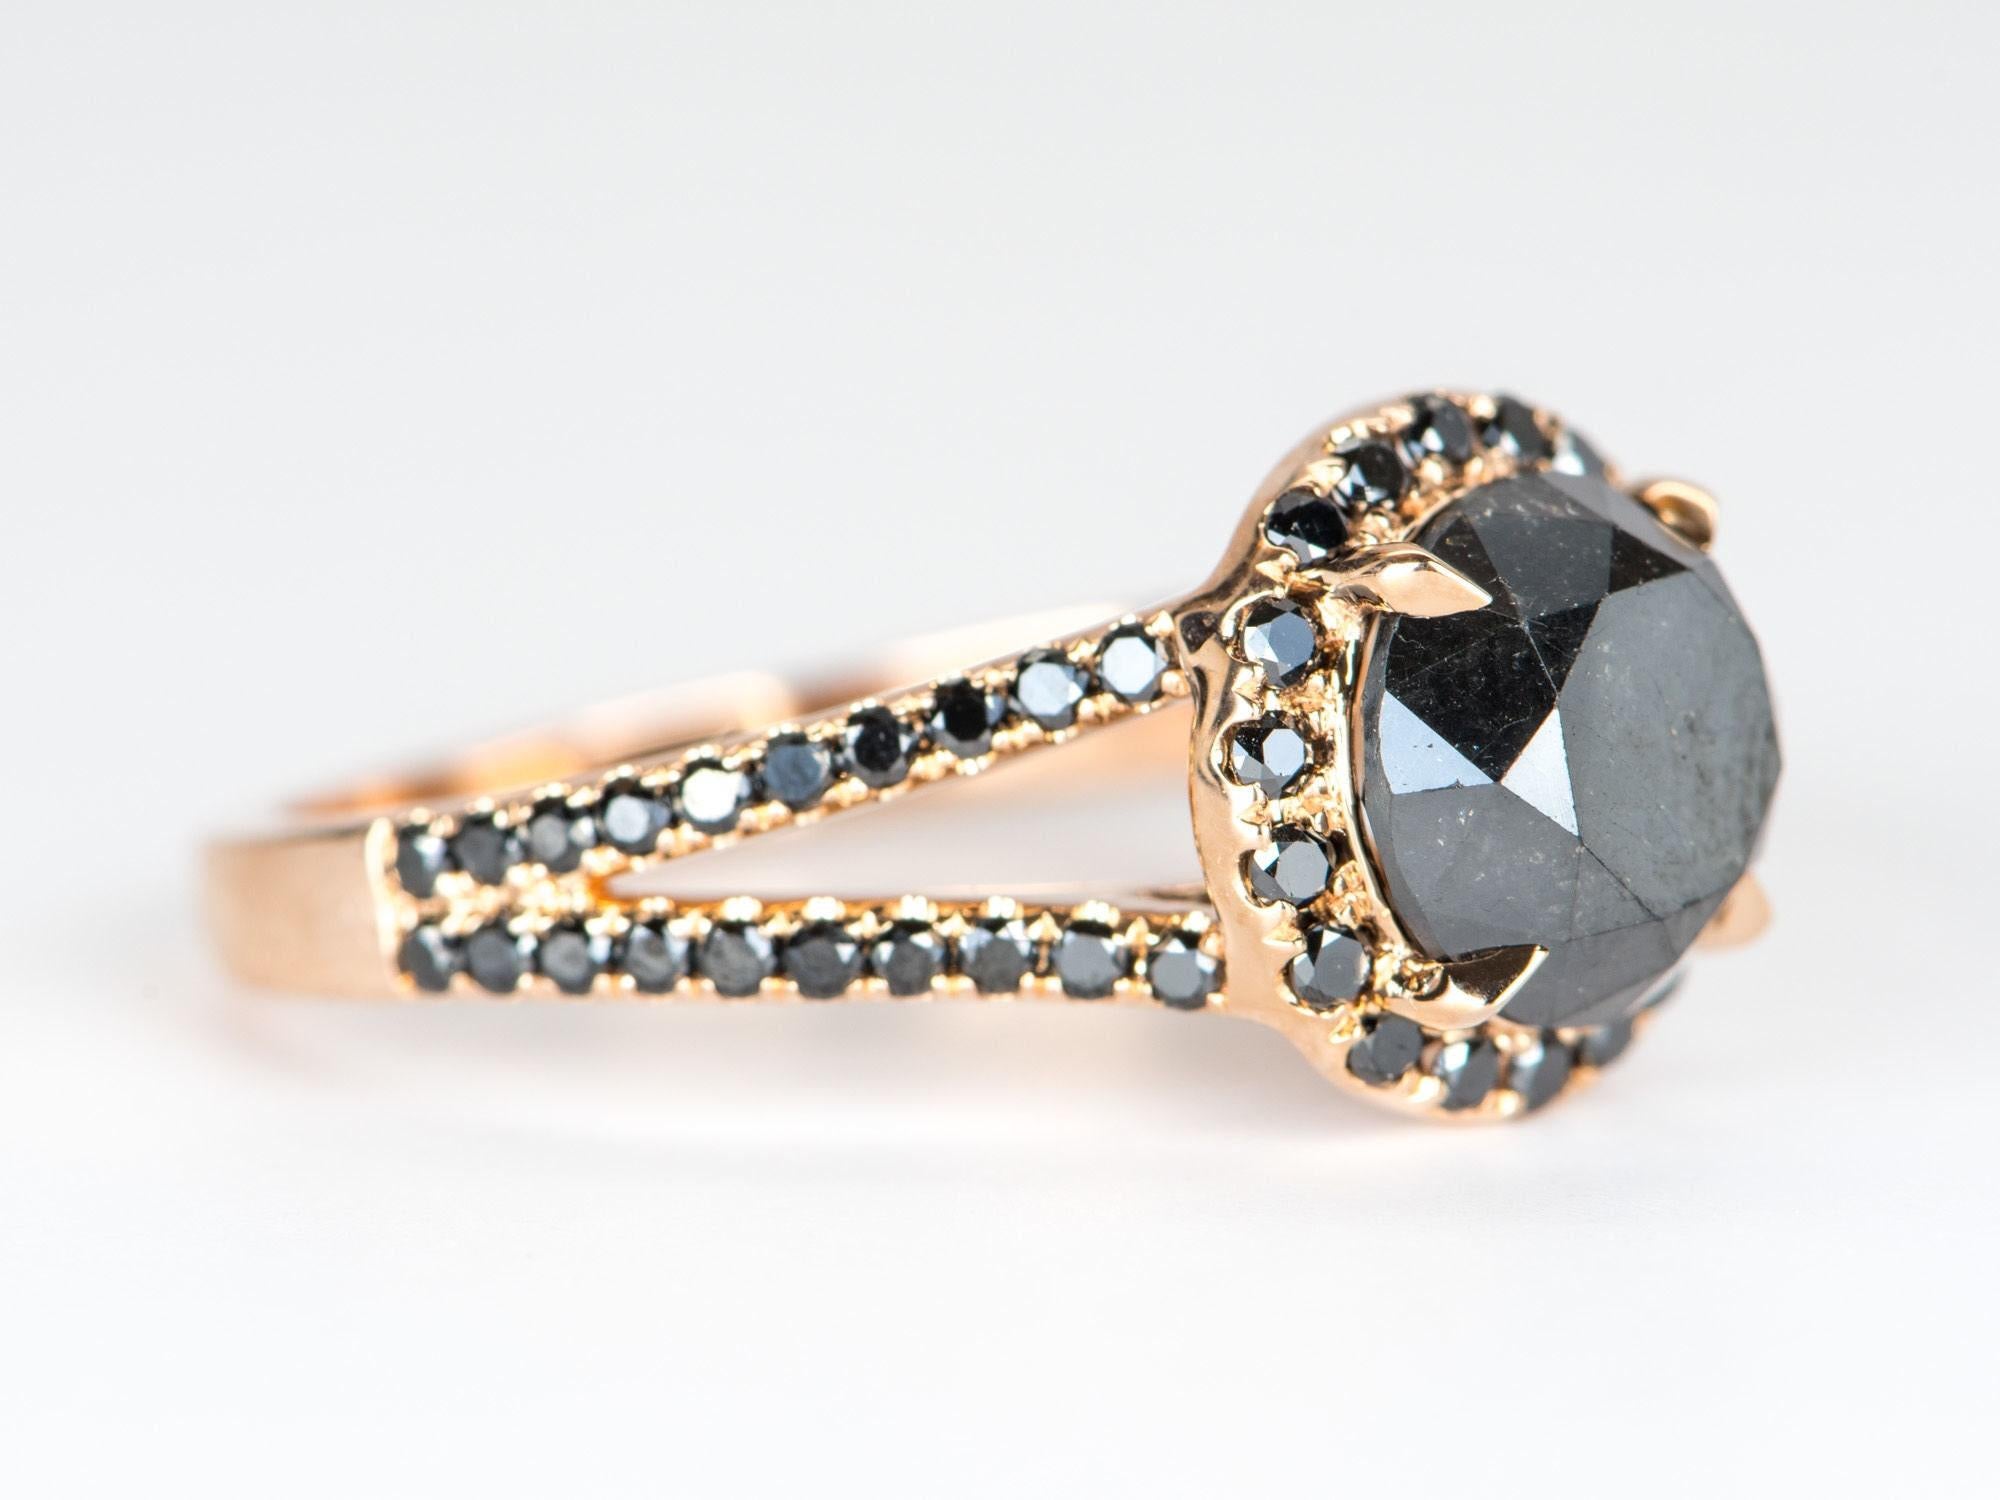 ♥ 2.96ct Round Black Diamond with Halo and Pave Band 14K Rose Gold Engagement Ring
♥ Solid 14k rose gold ring set with a beautiful round-shaped diamond
♥ Gorgeous black color!
♥ The item measures 10.8 mm in length, 10.6 mm in width, and stands 7.9